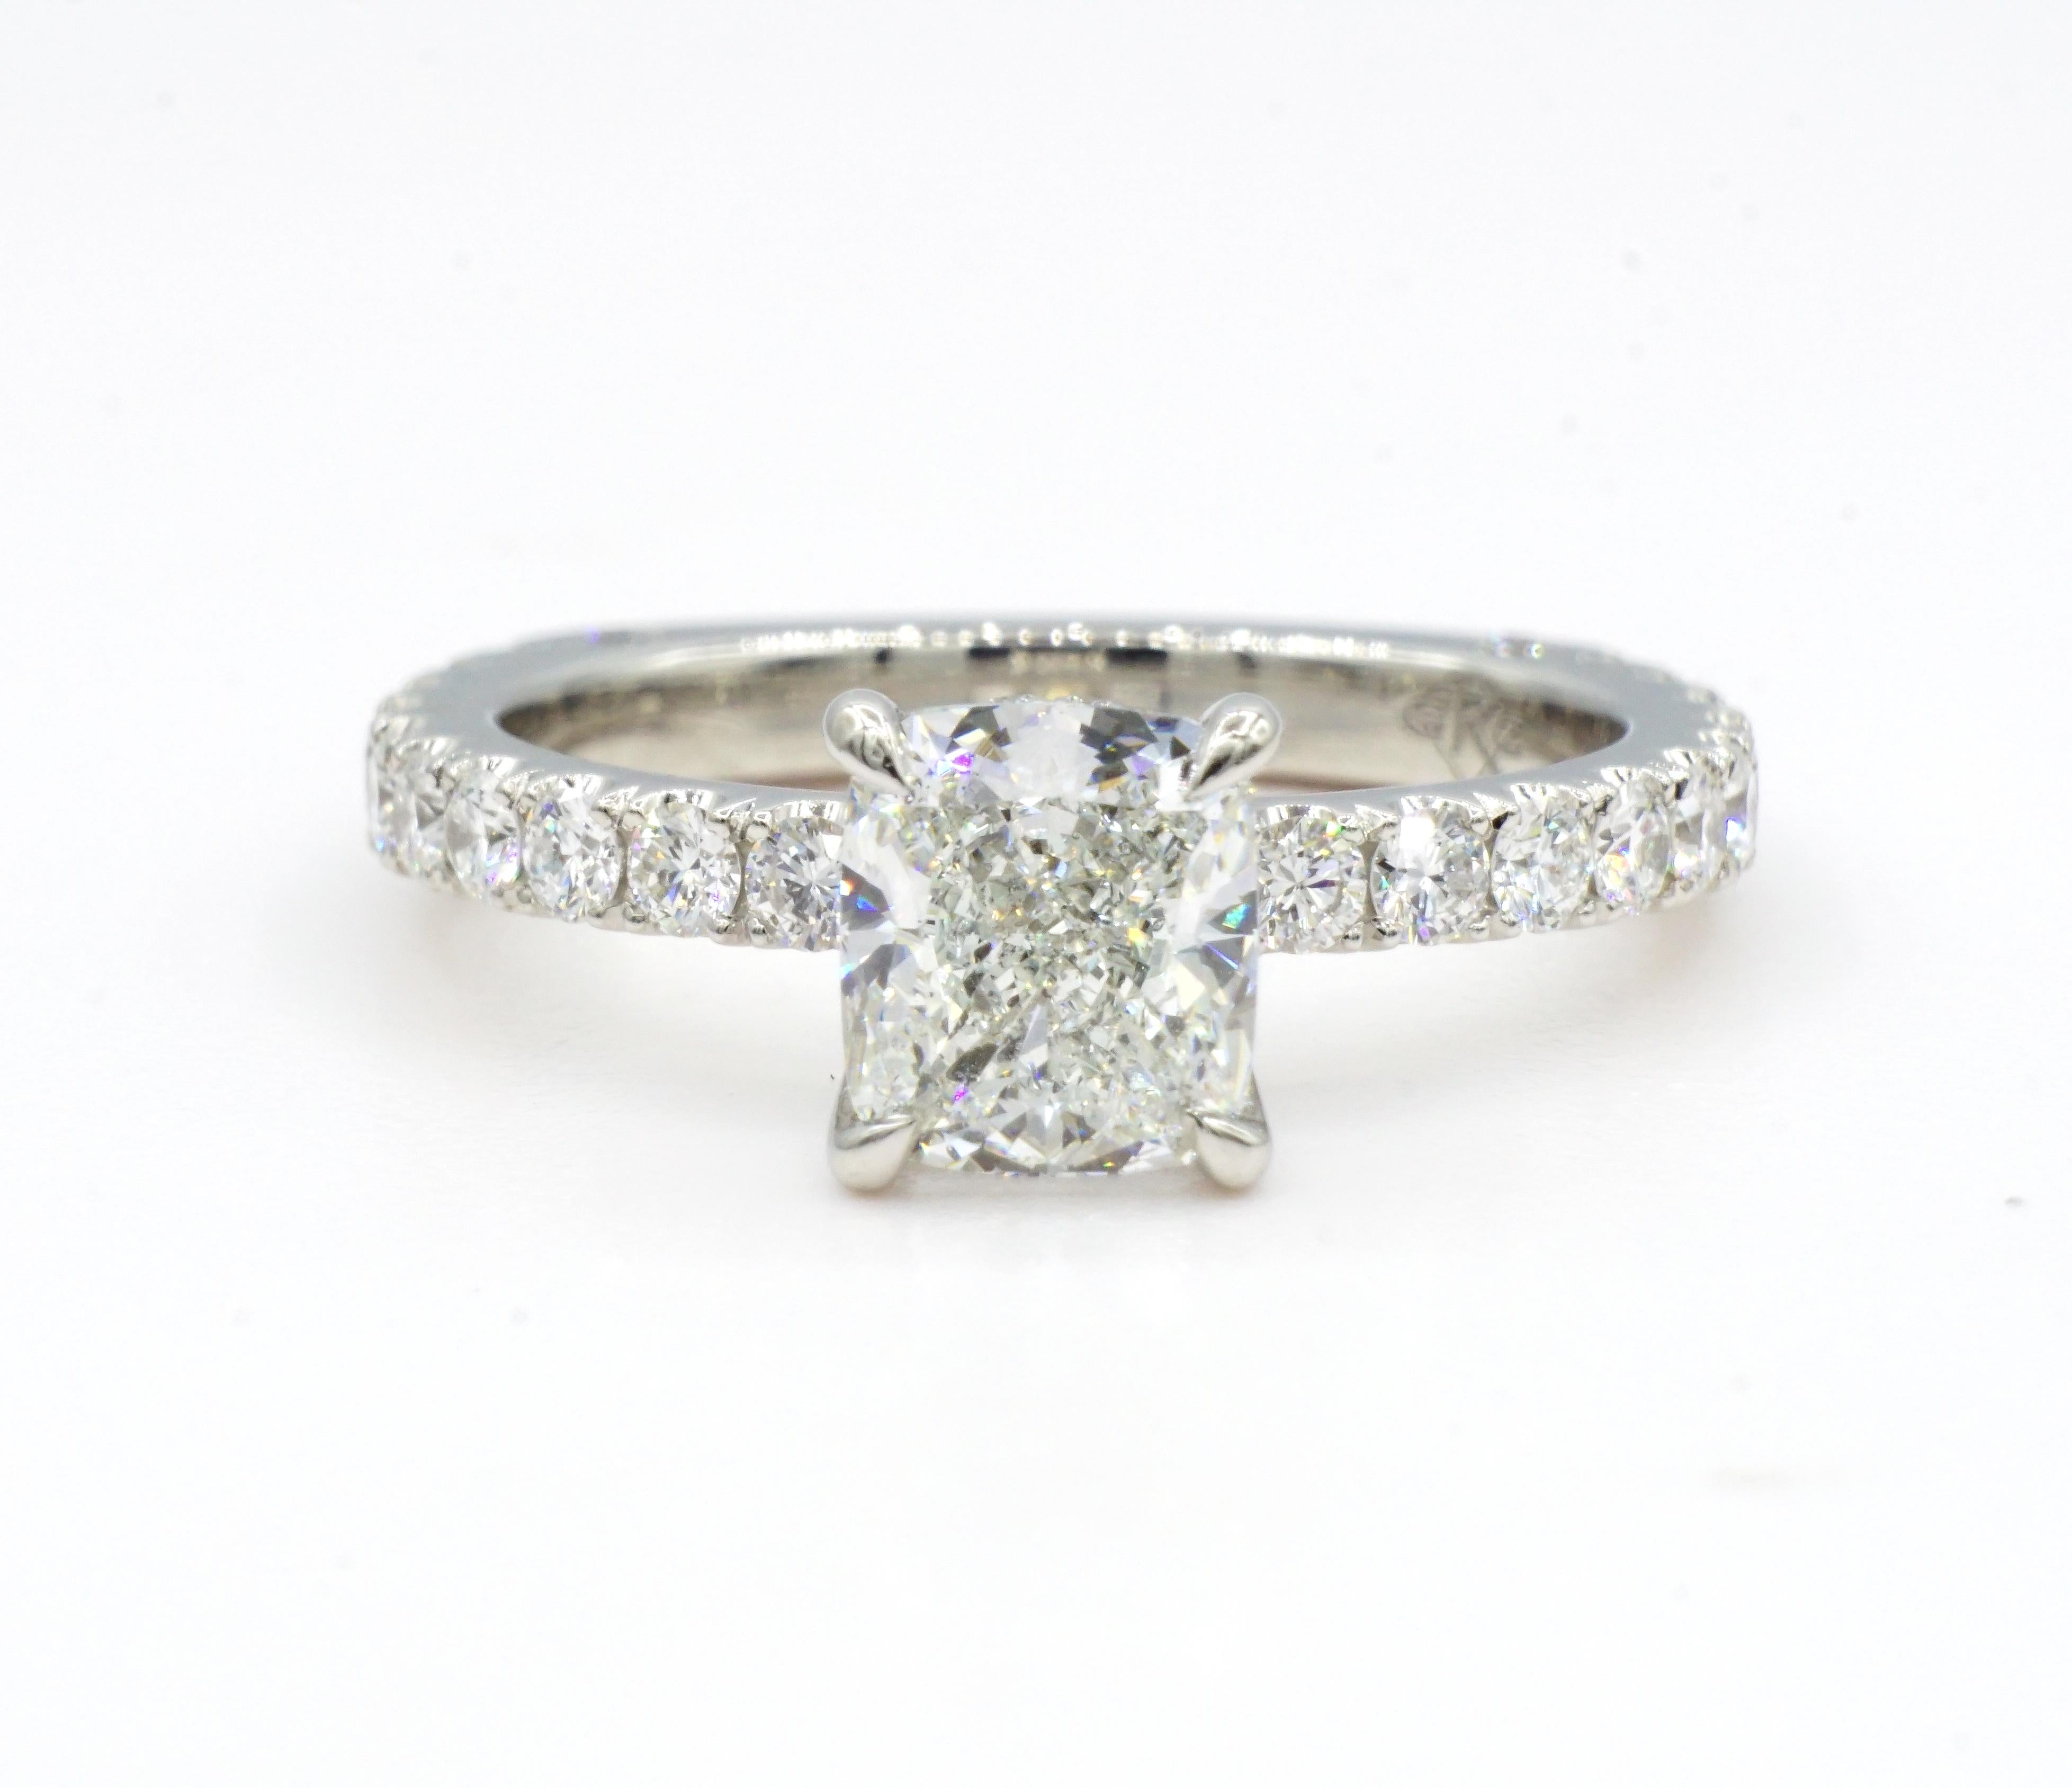 Platinum Cushion 1.51ct Diamond Engagement Ring GIA Cert G SI2, size 6.25  In New Condition For Sale In Rancho Santa Fe, CA